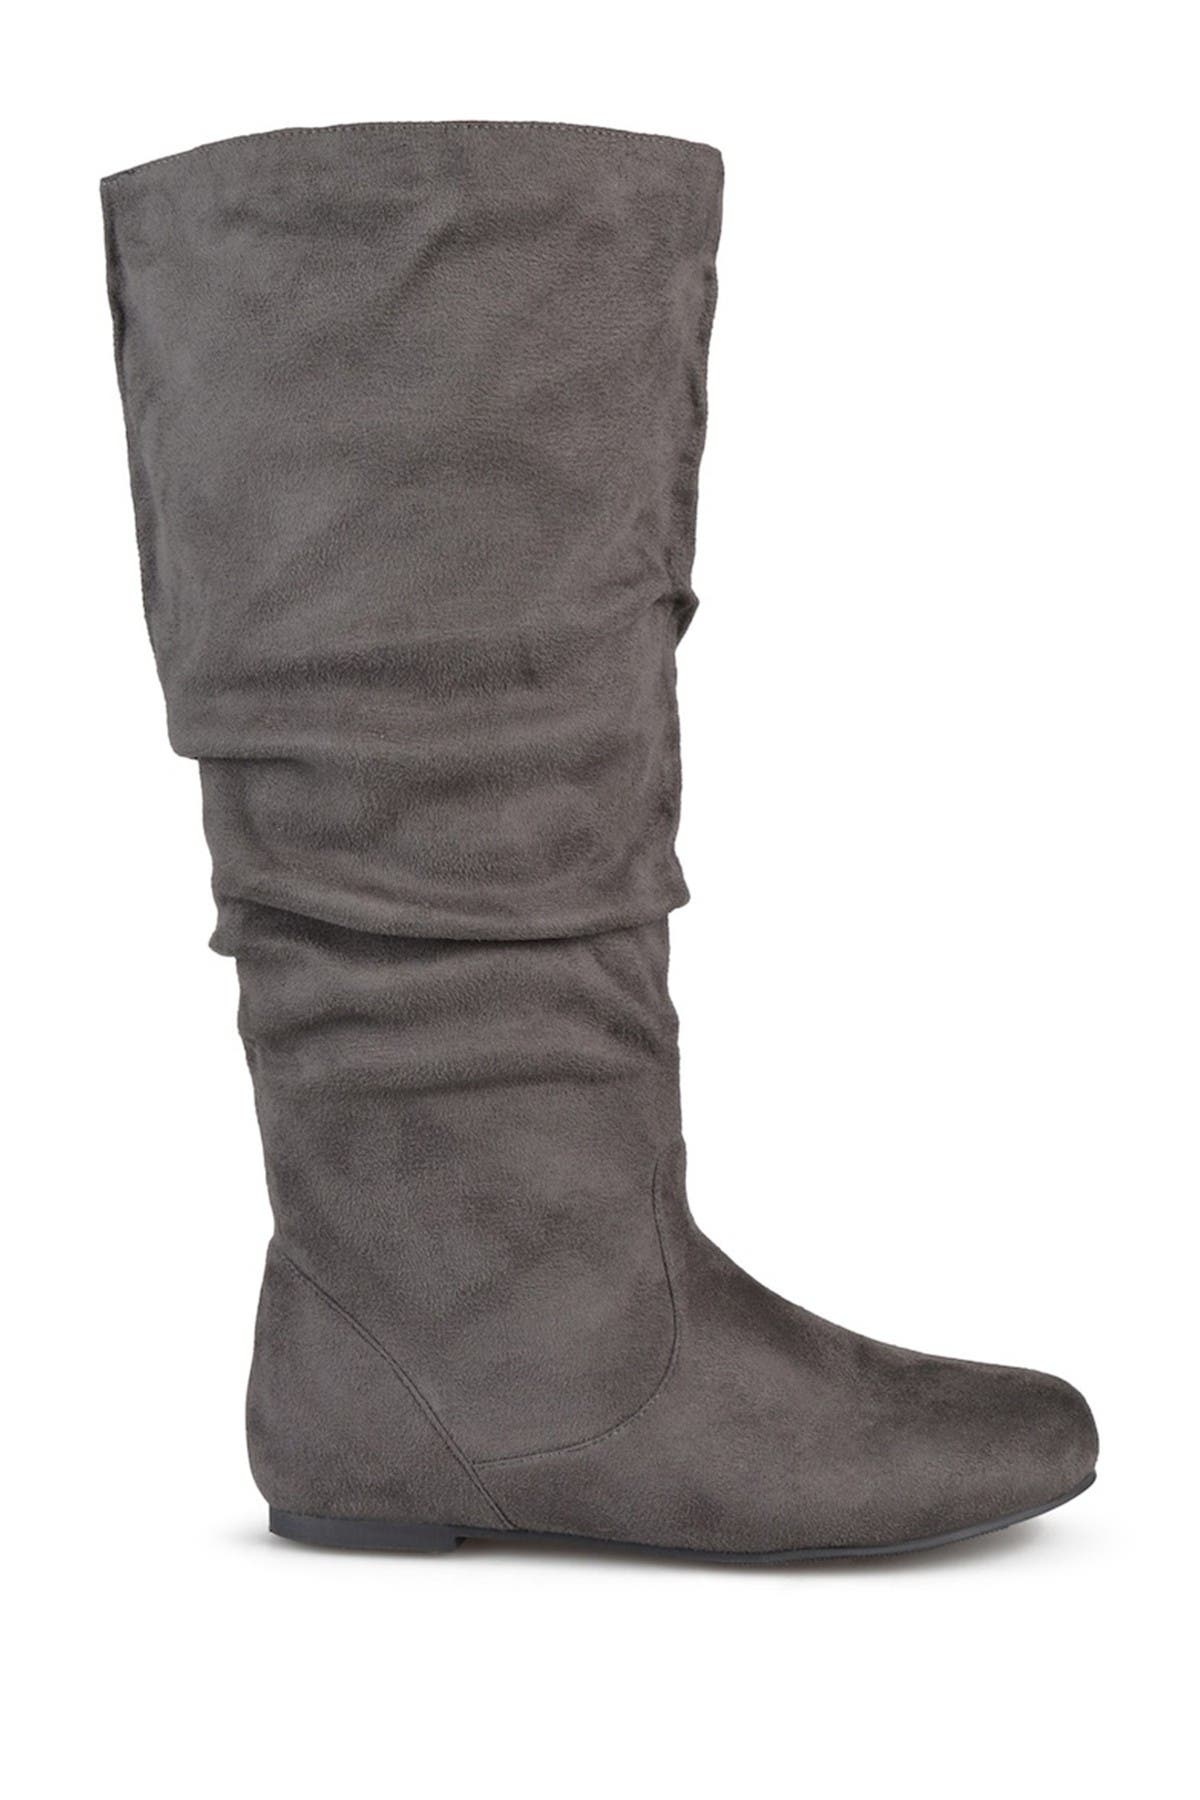 JOURNEE Collection | Rebecca Slouchy Riding Boot - Wide Calf ...